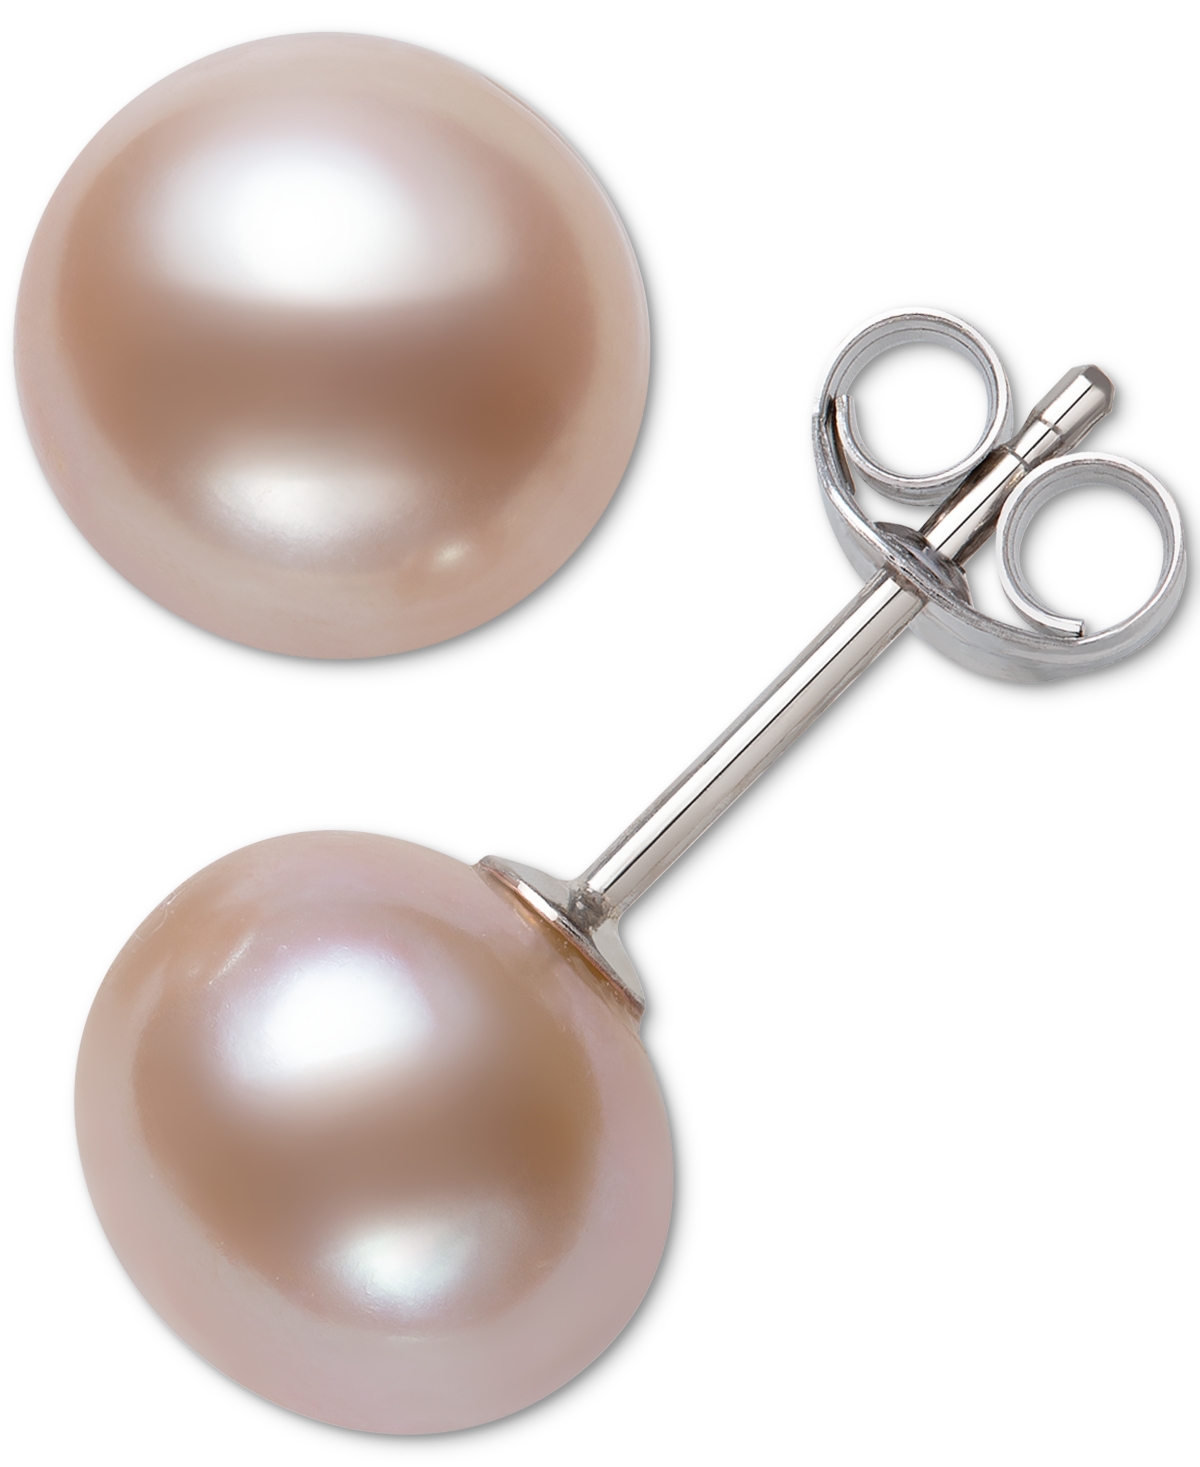 Cultured Freshwater Button Pearl (8-9mm) Stud Earrings - Gray